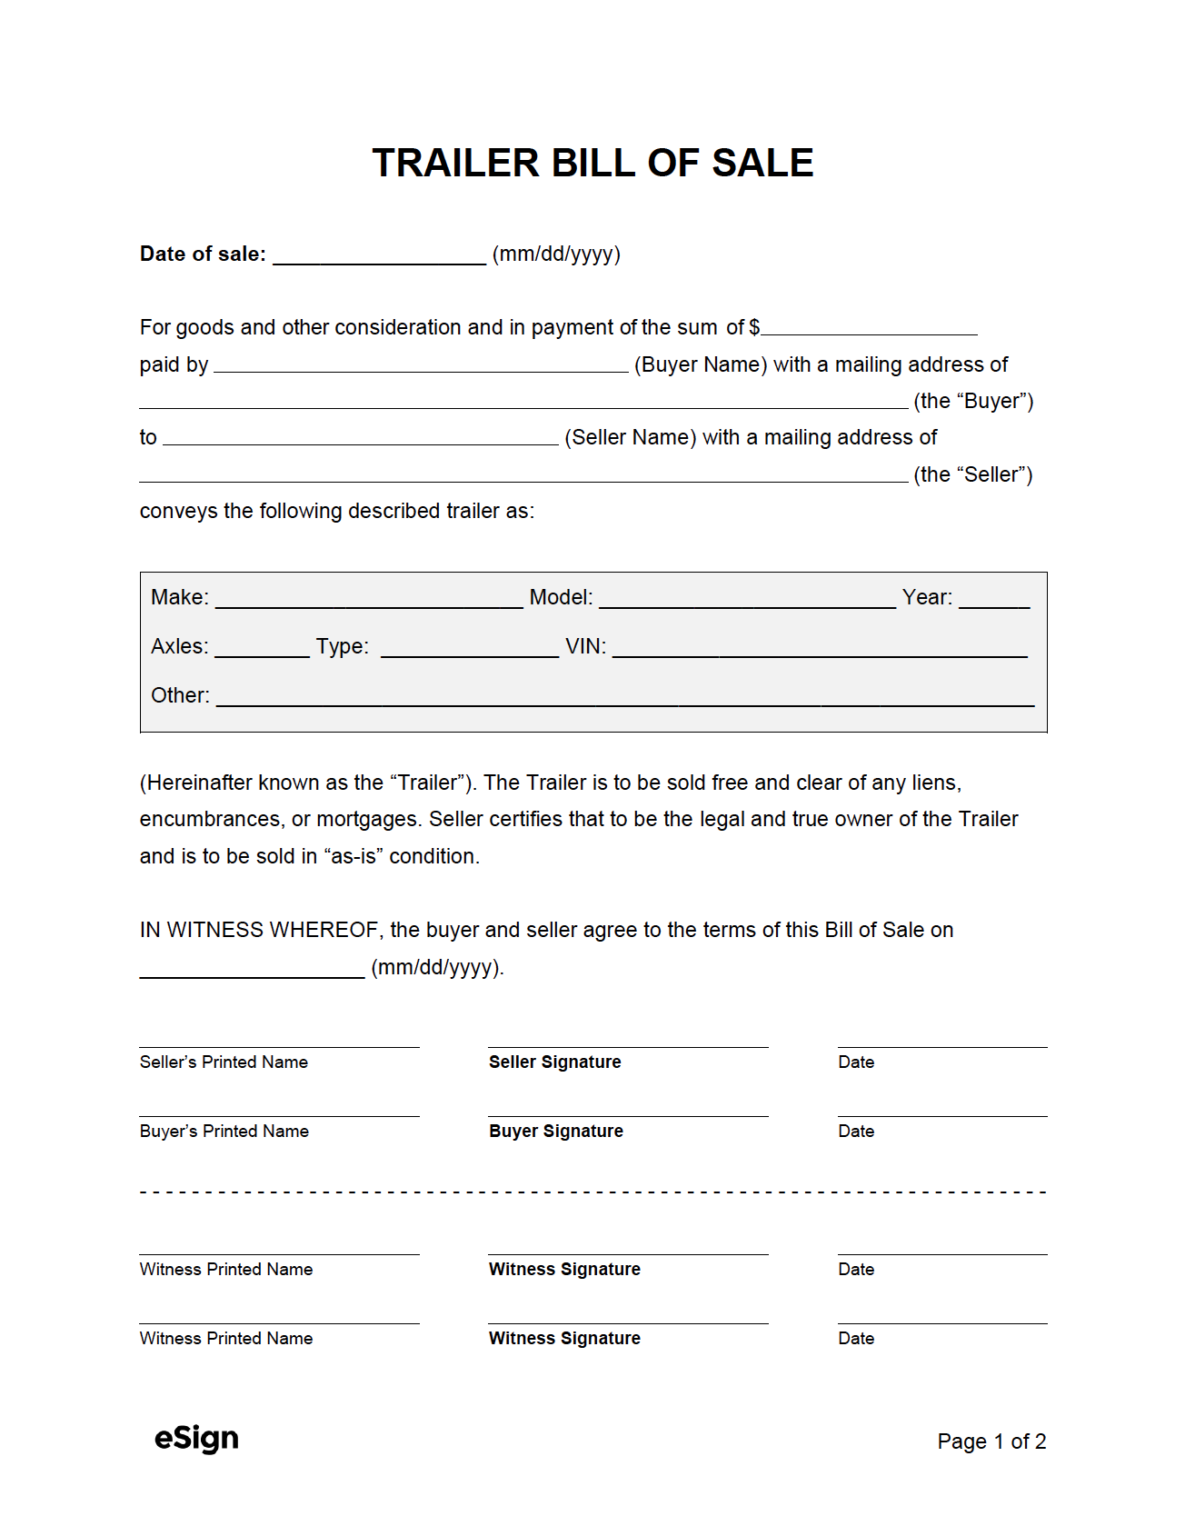 Free Bill of Sale Forms - PDF | Word